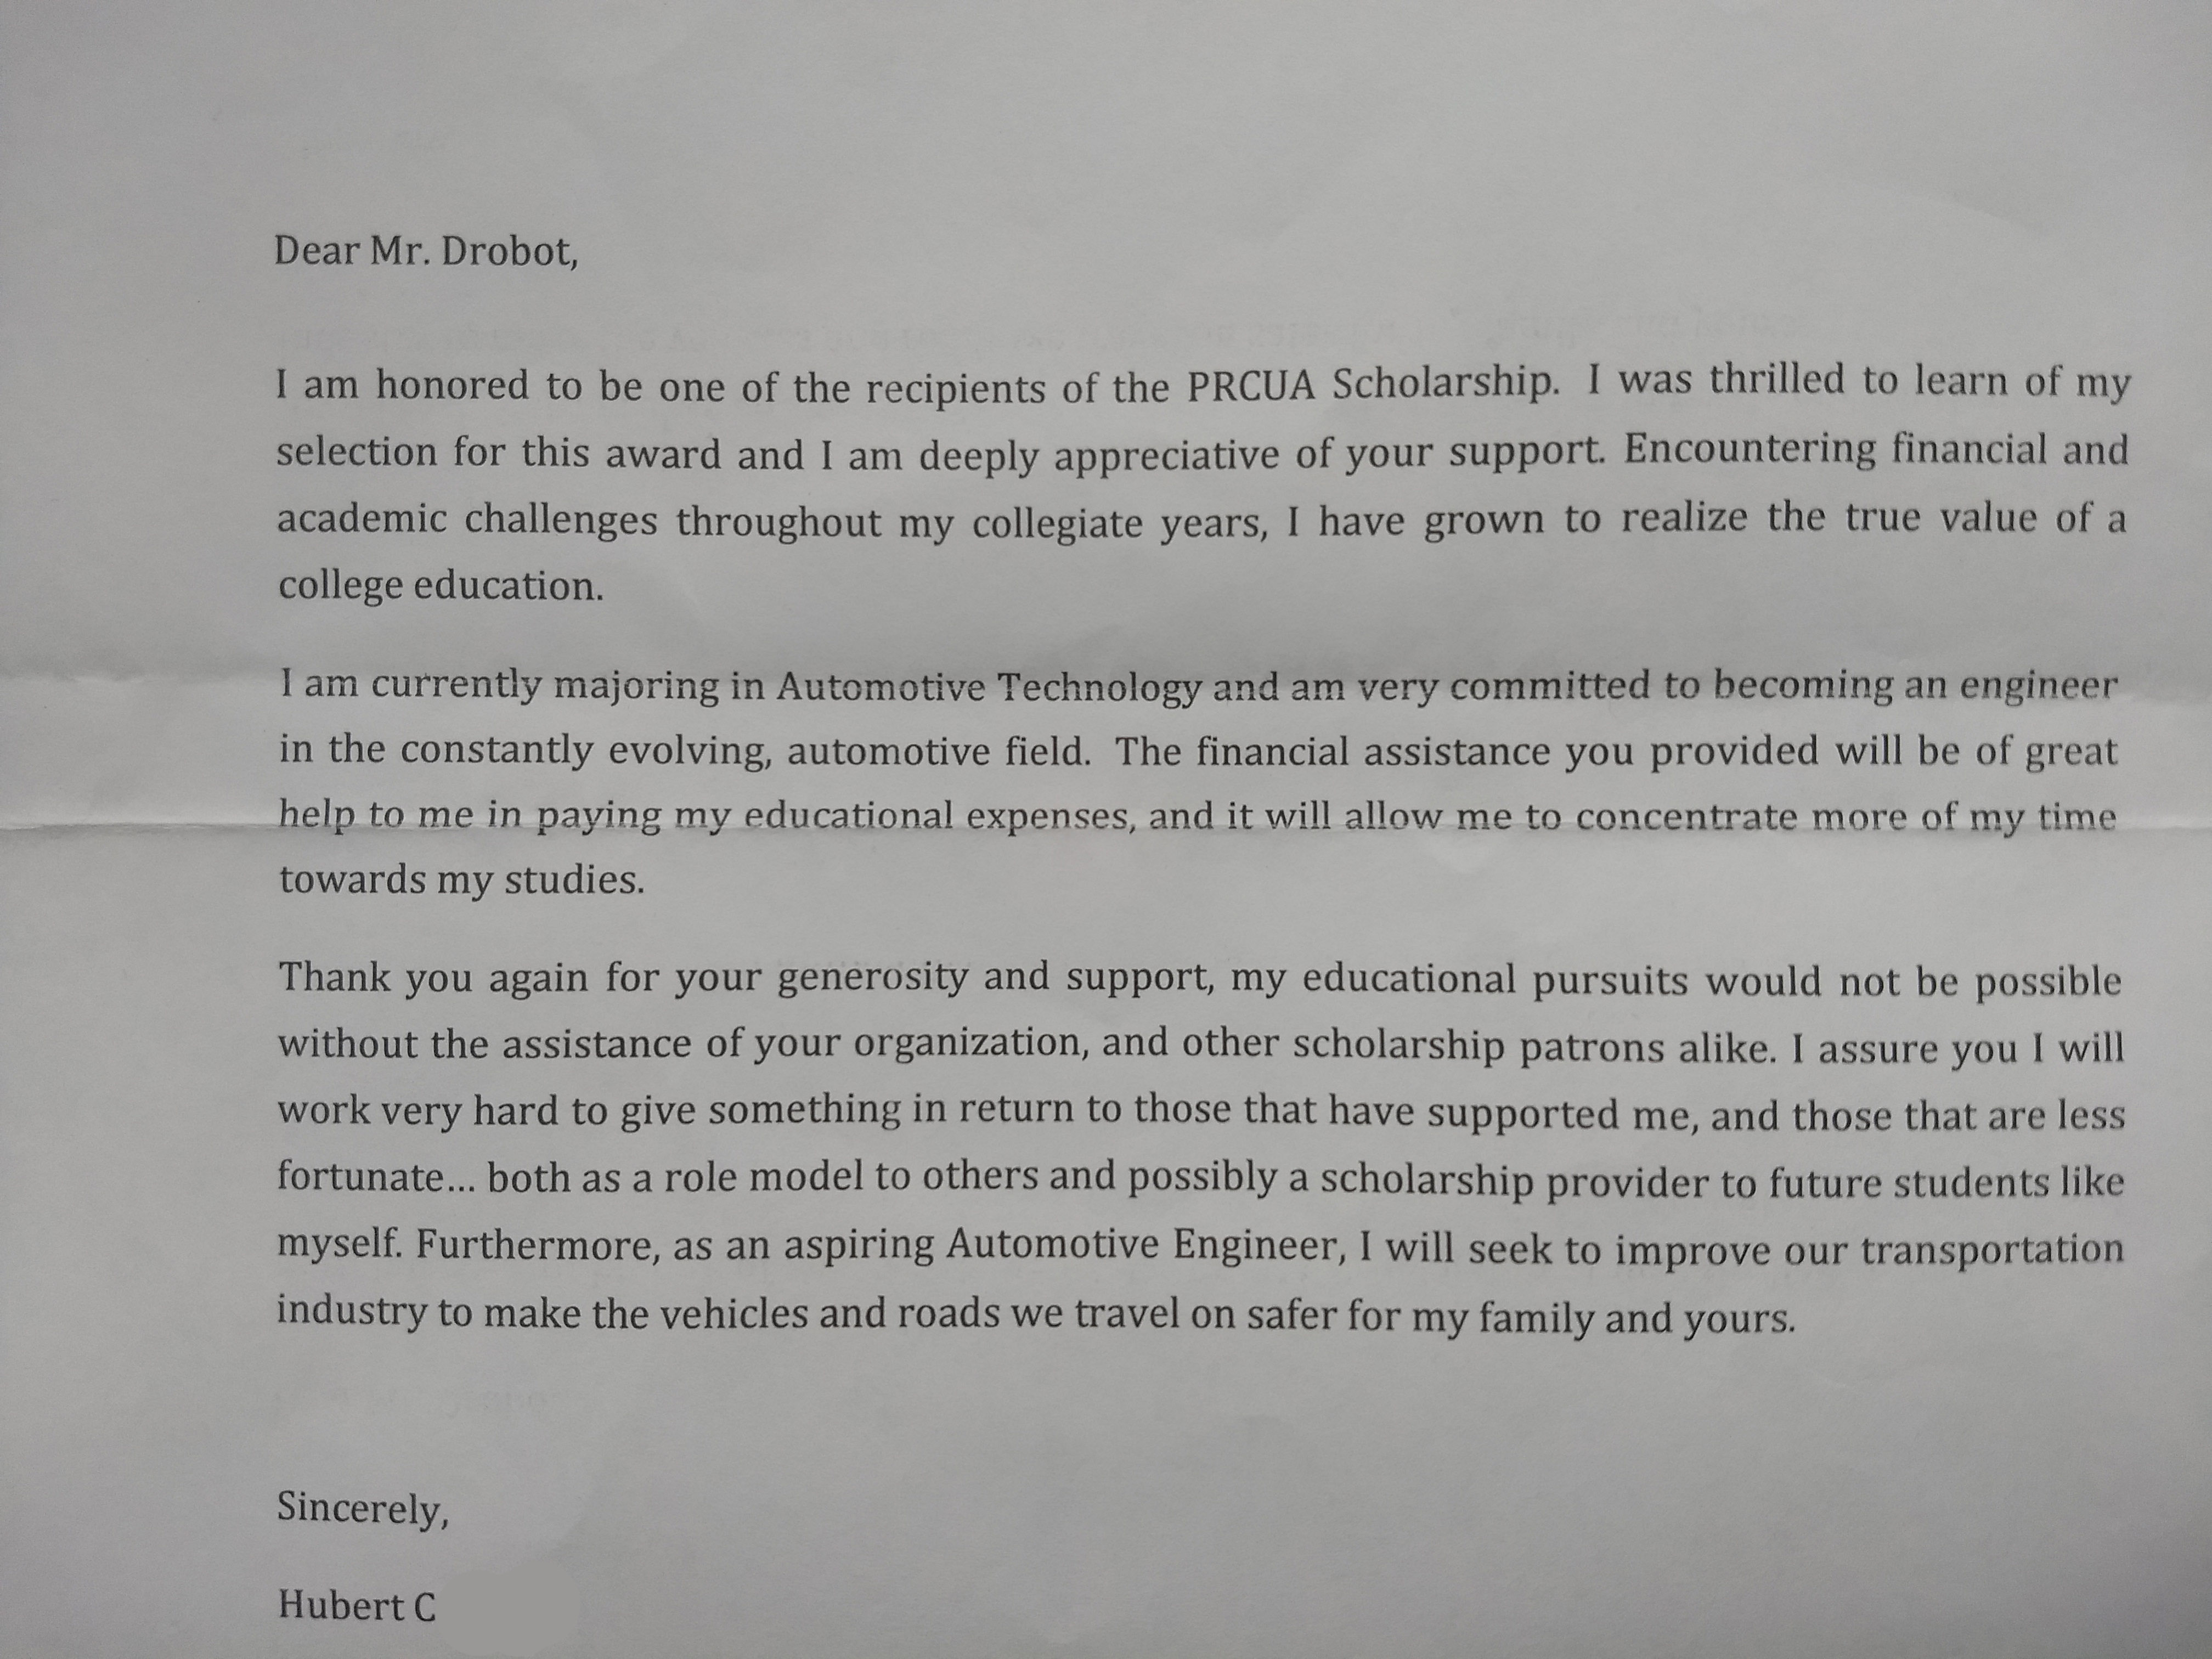 Scholarship Recipient Thank You Notes - PRCUALife